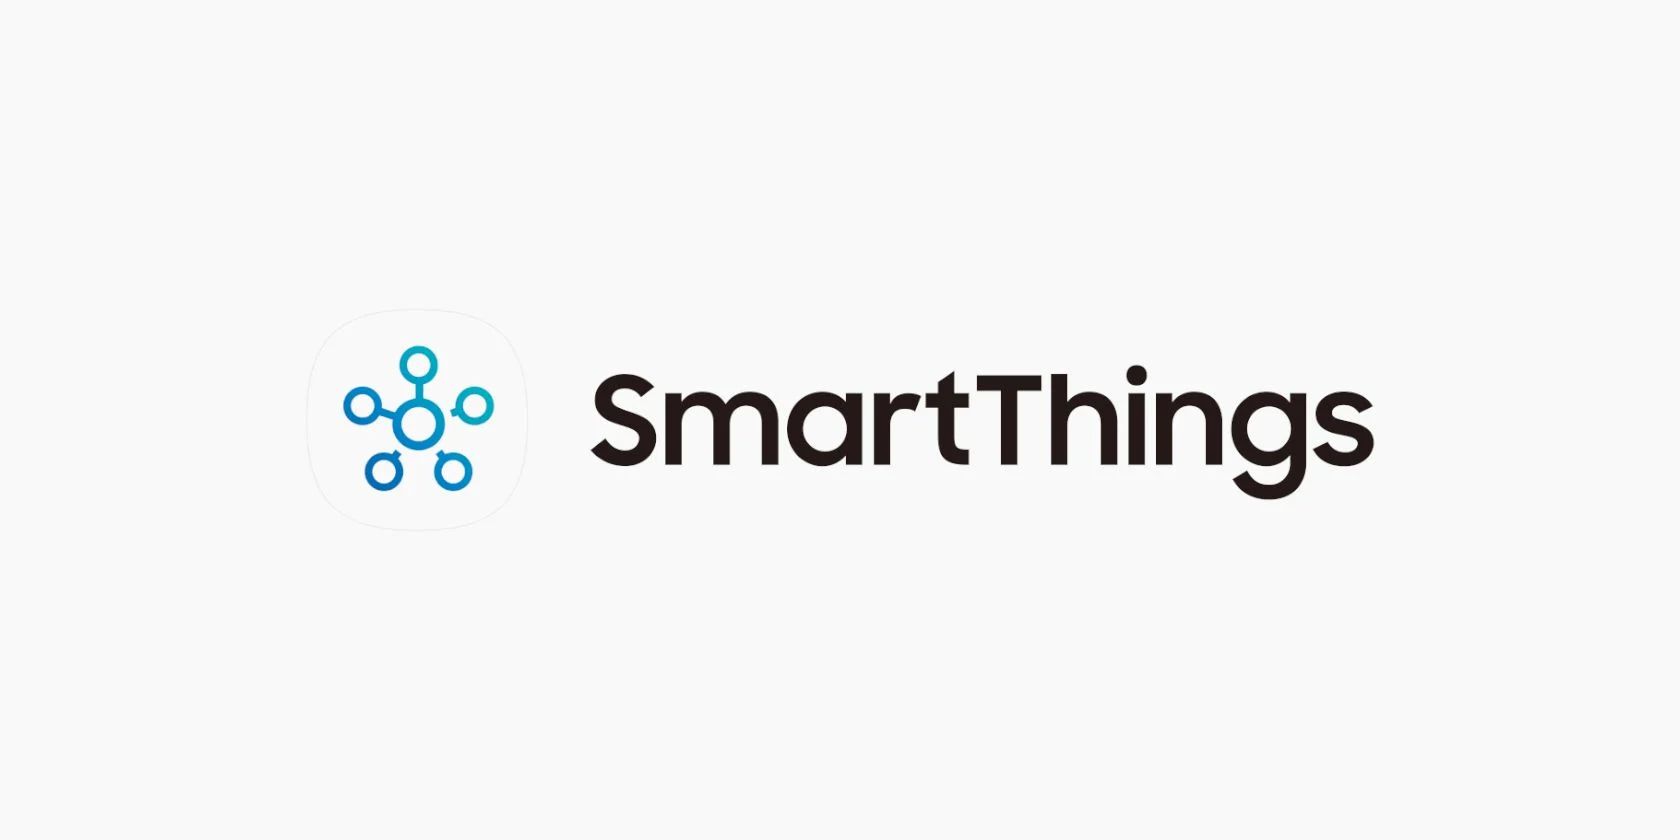 download samsung smartthings app for android